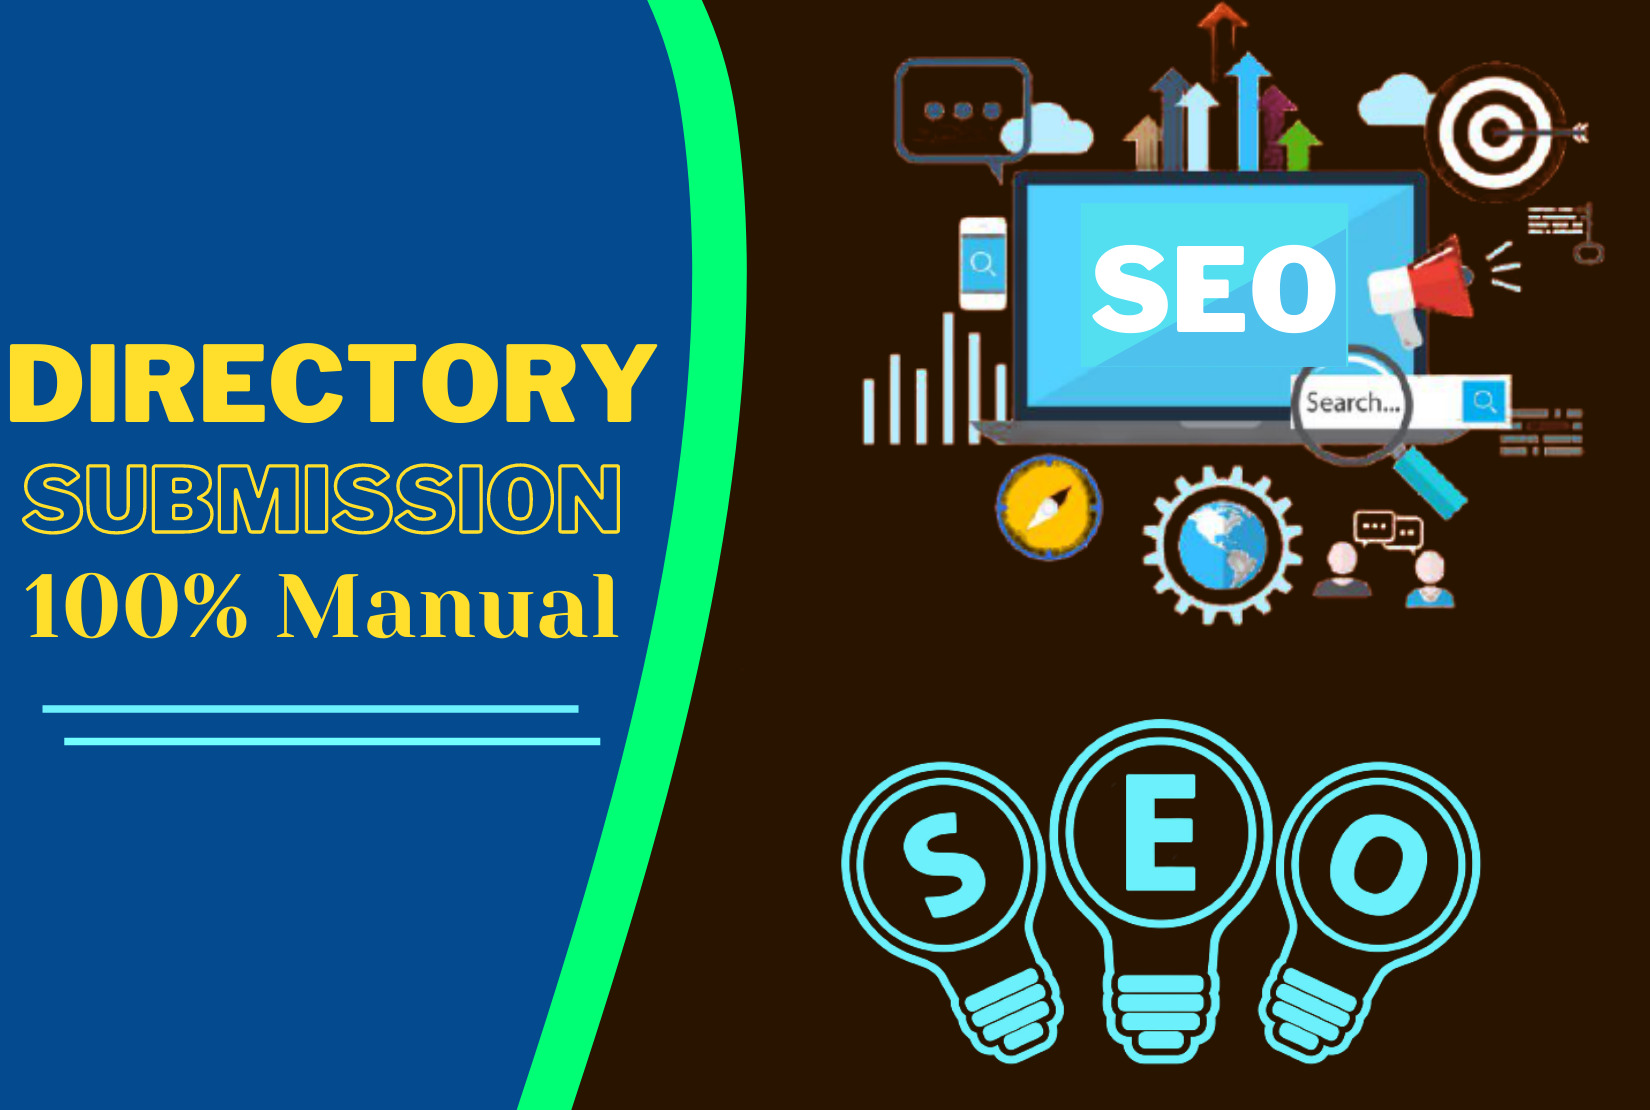 I will create manual 100 directory submission SEO backlinks